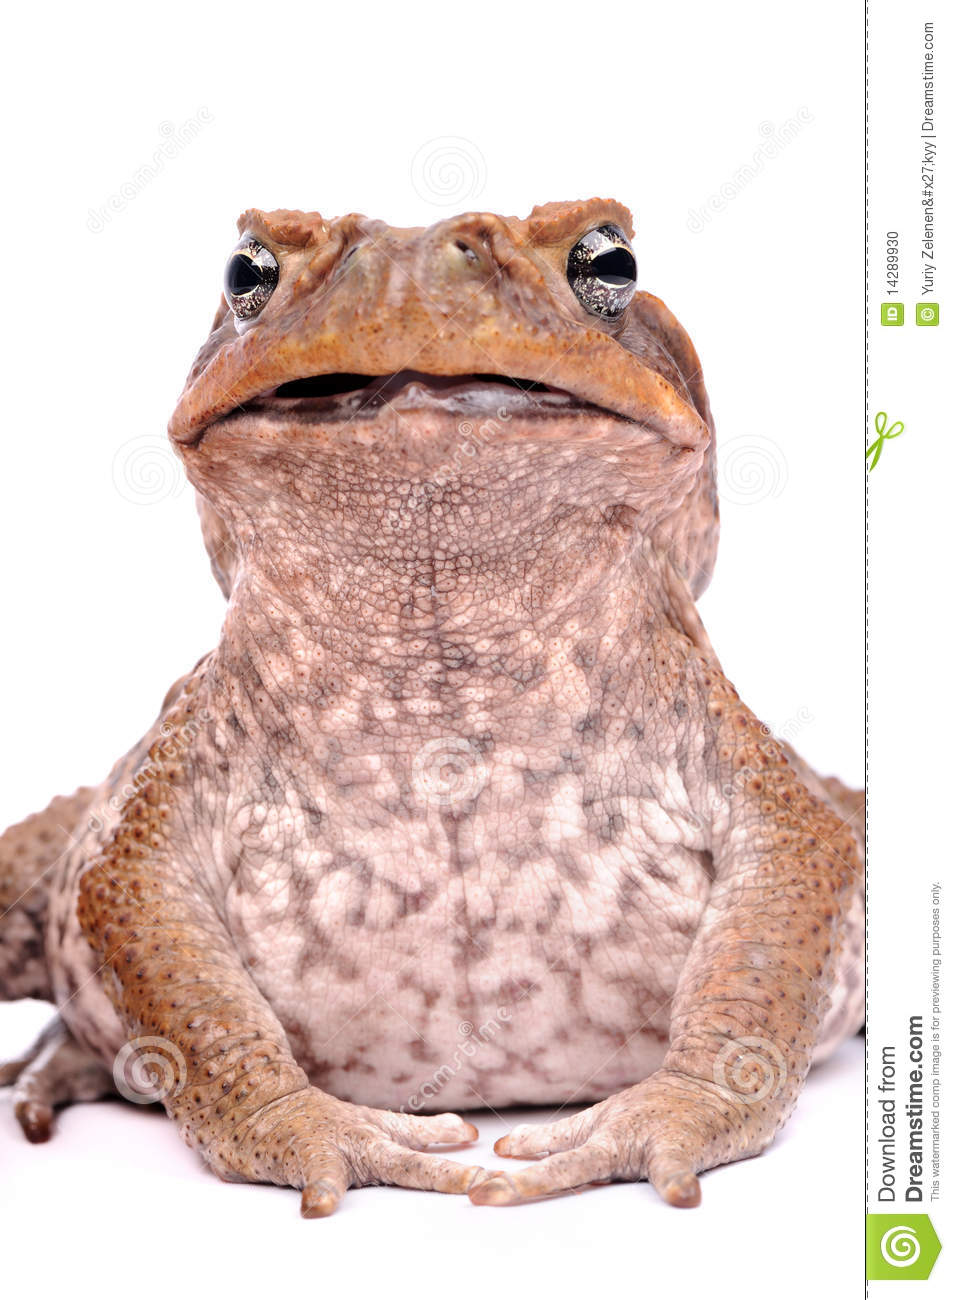 Cane Toad clipart #1, Download drawings